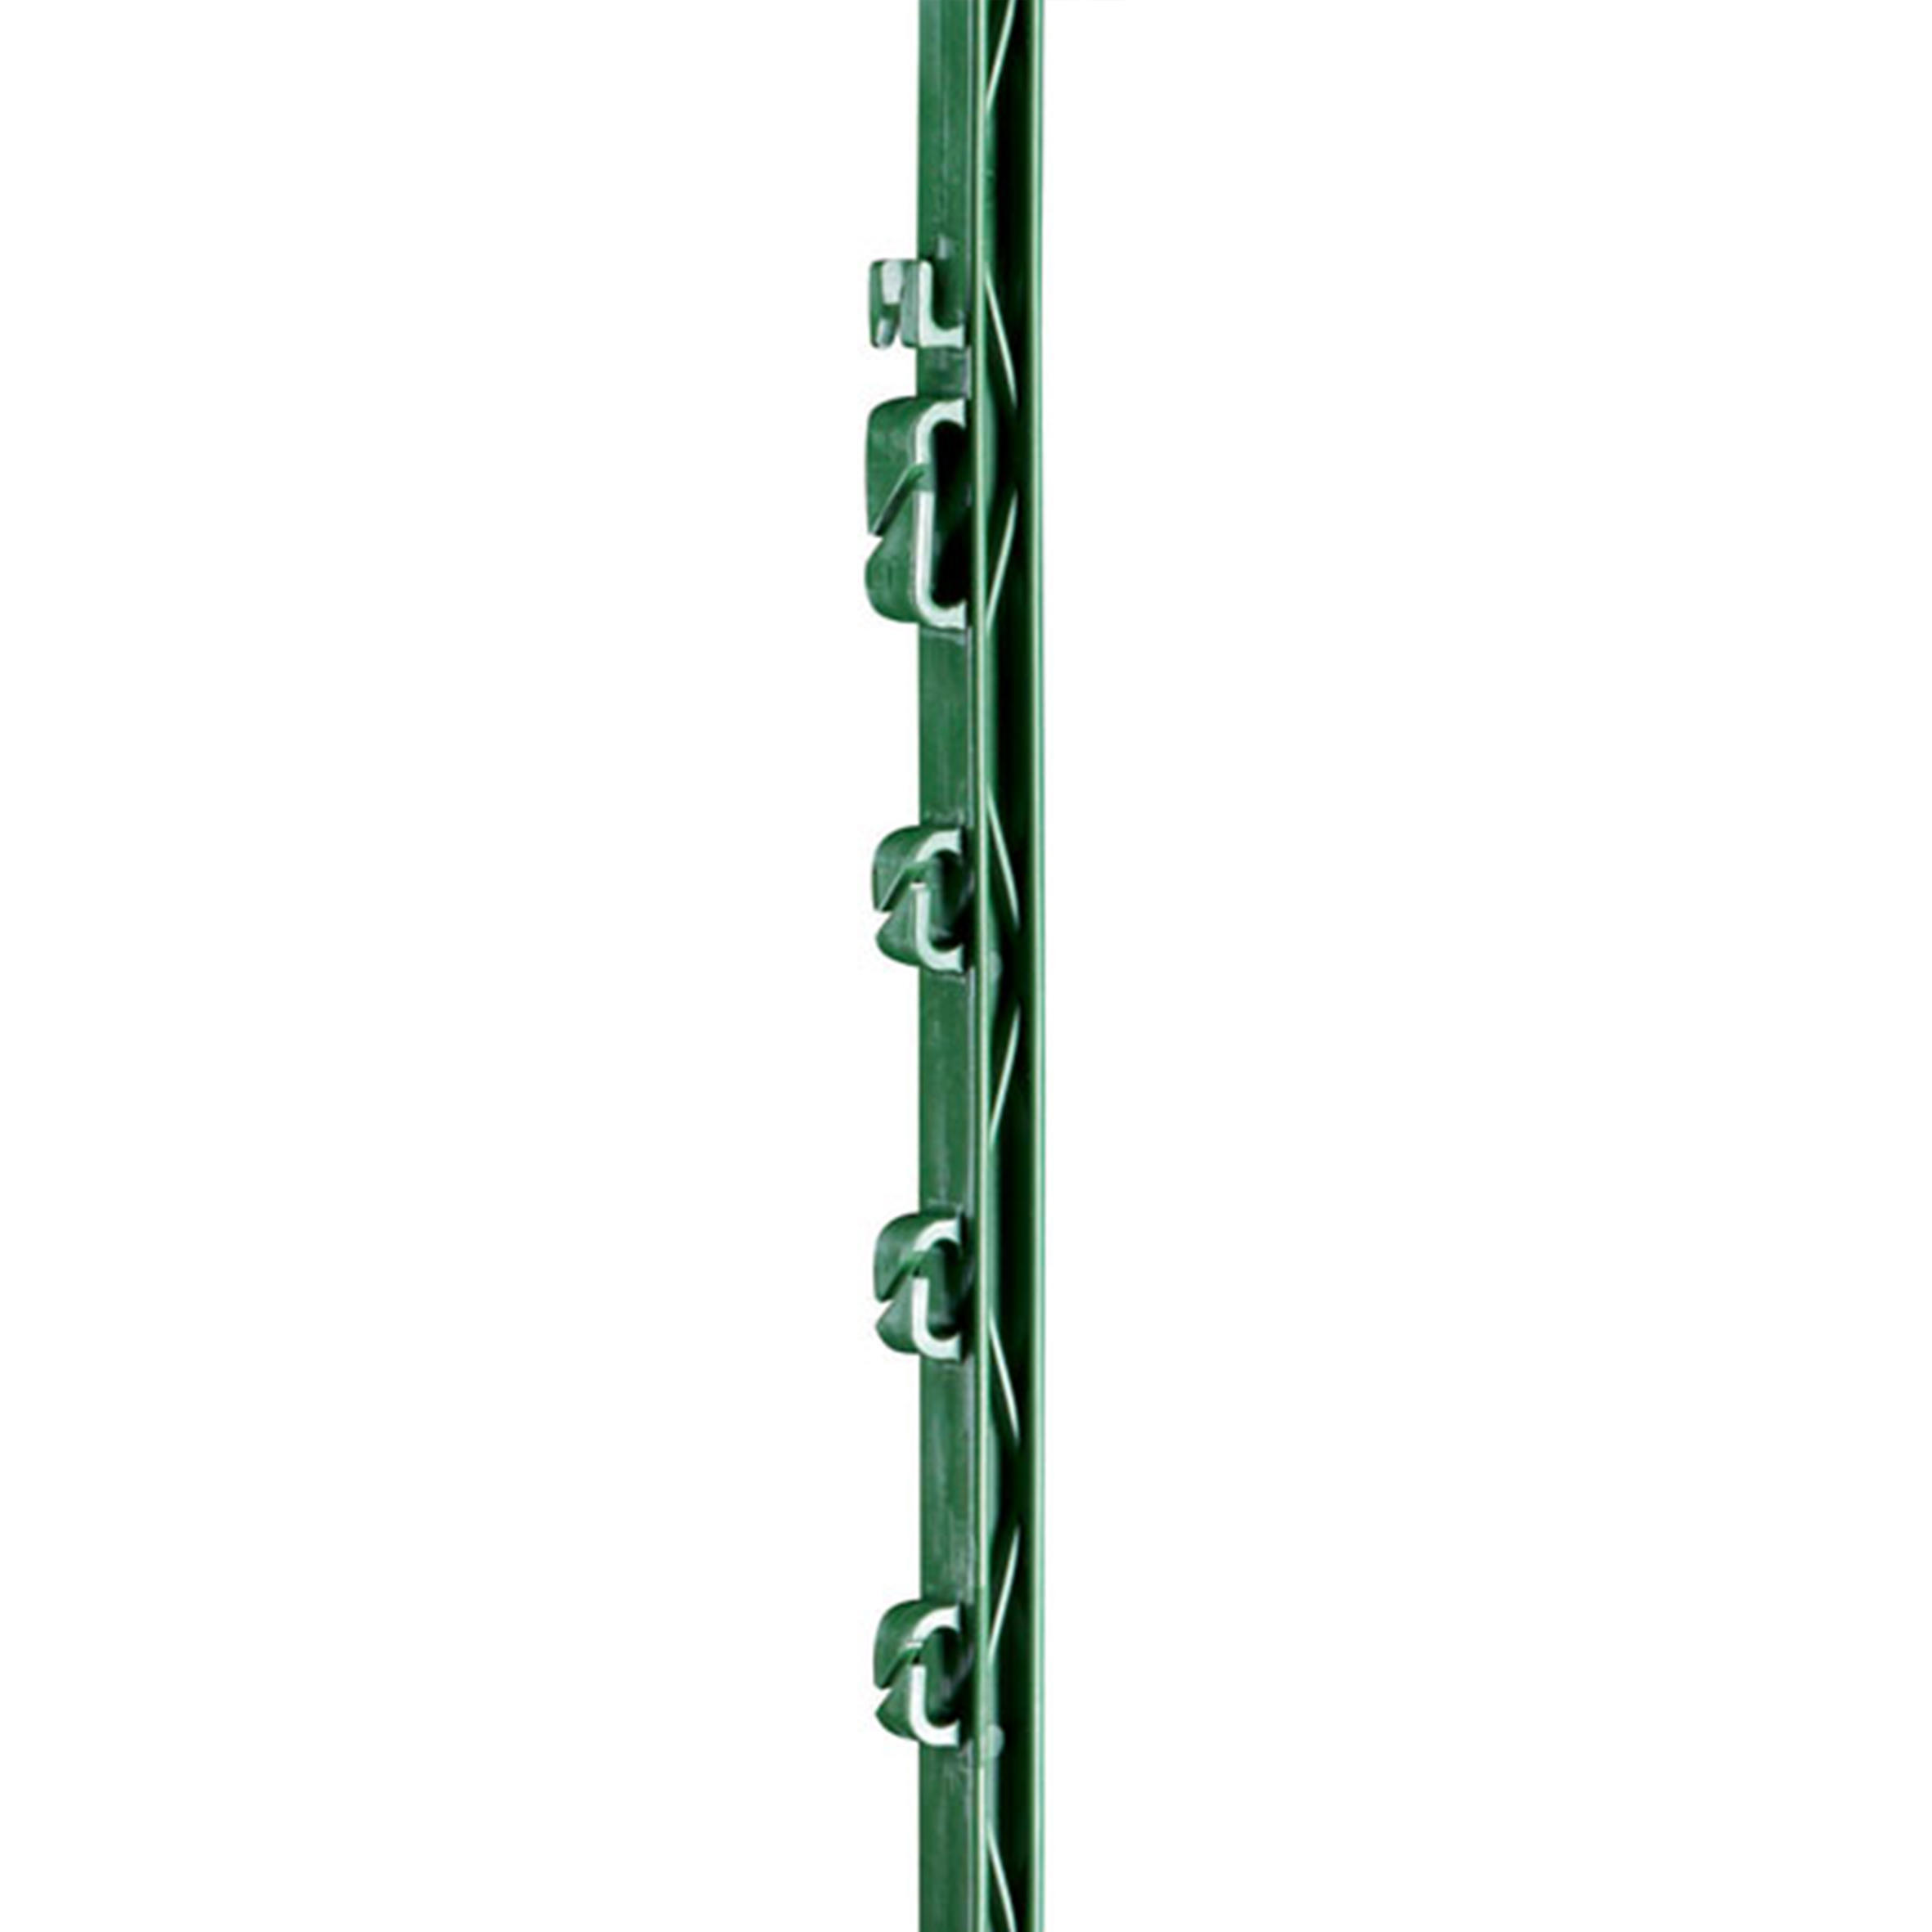 Plastic Horse Riding Fencing Posts 160 cm 5-Pack - Green Stirrup 3/5